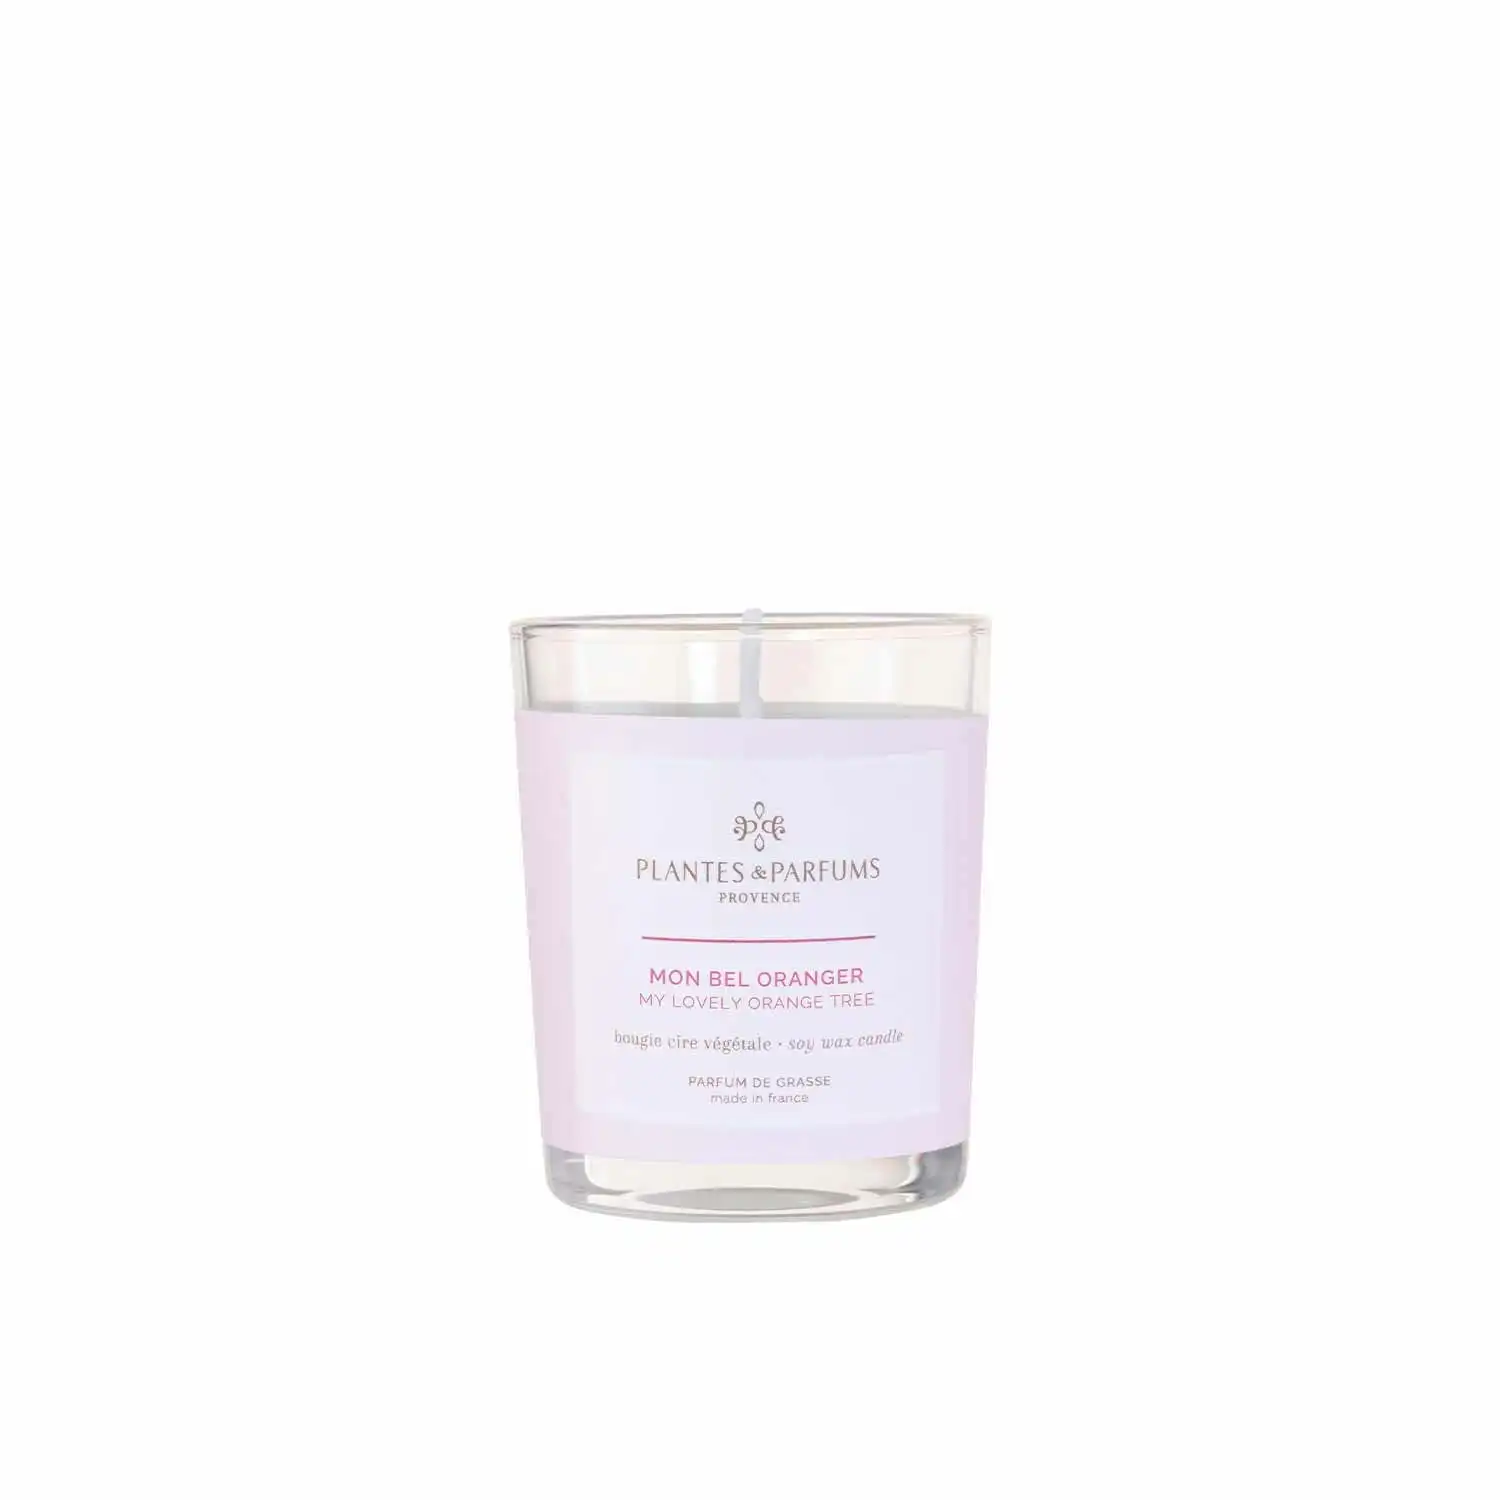 Plantes & Parfums | 75g Handcrafted Perfumed Candle - My Lovely Orange Tree